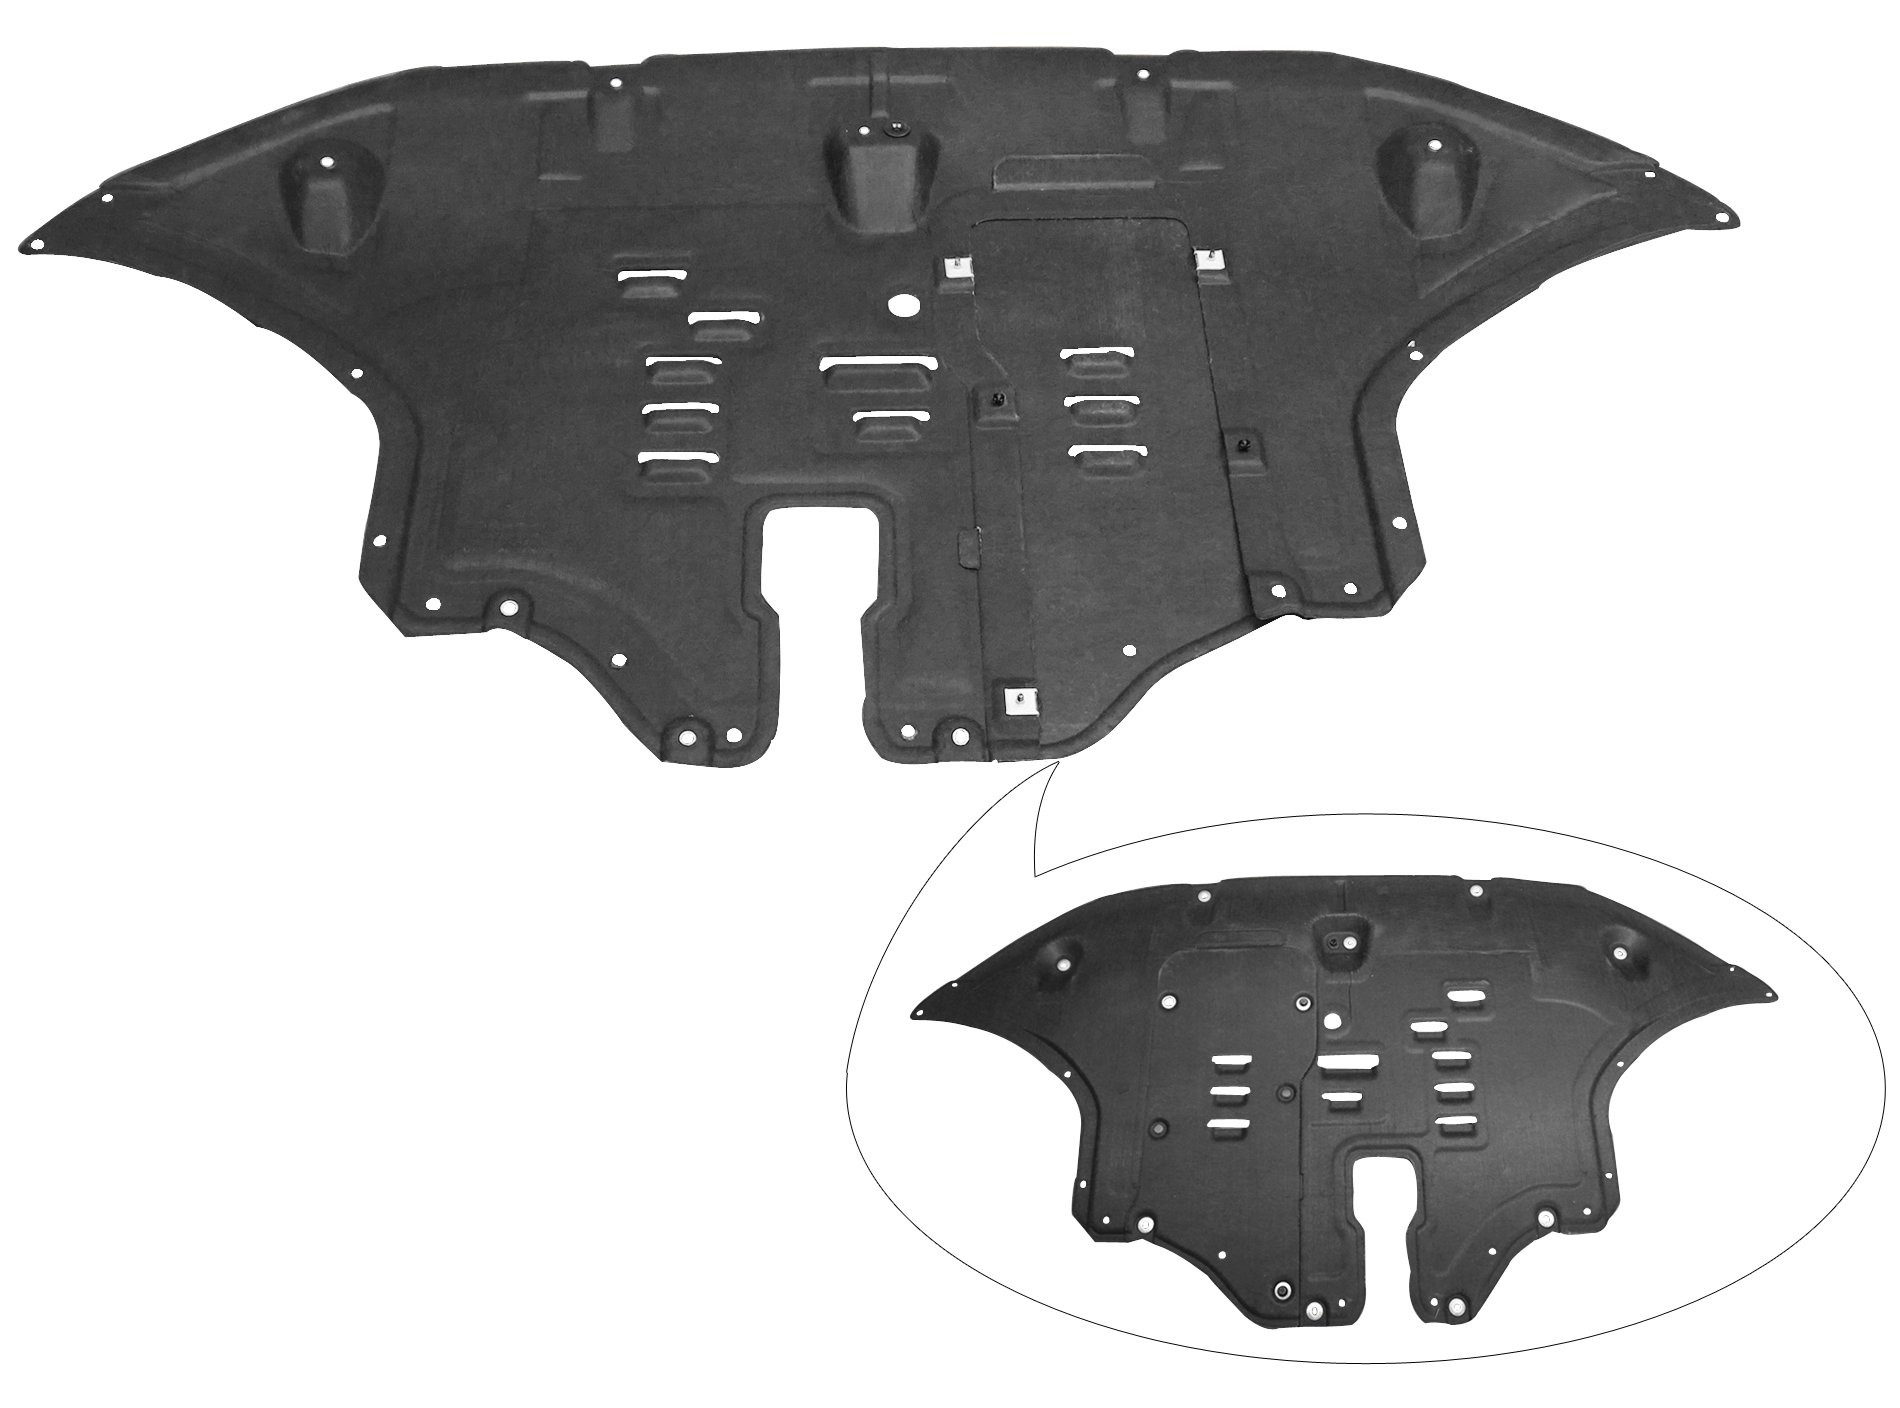 Aftermarket UNDER ENGINE COVERS for HYUNDAI - SANTA FE, SANTA FE,19-20,Lower engine cover